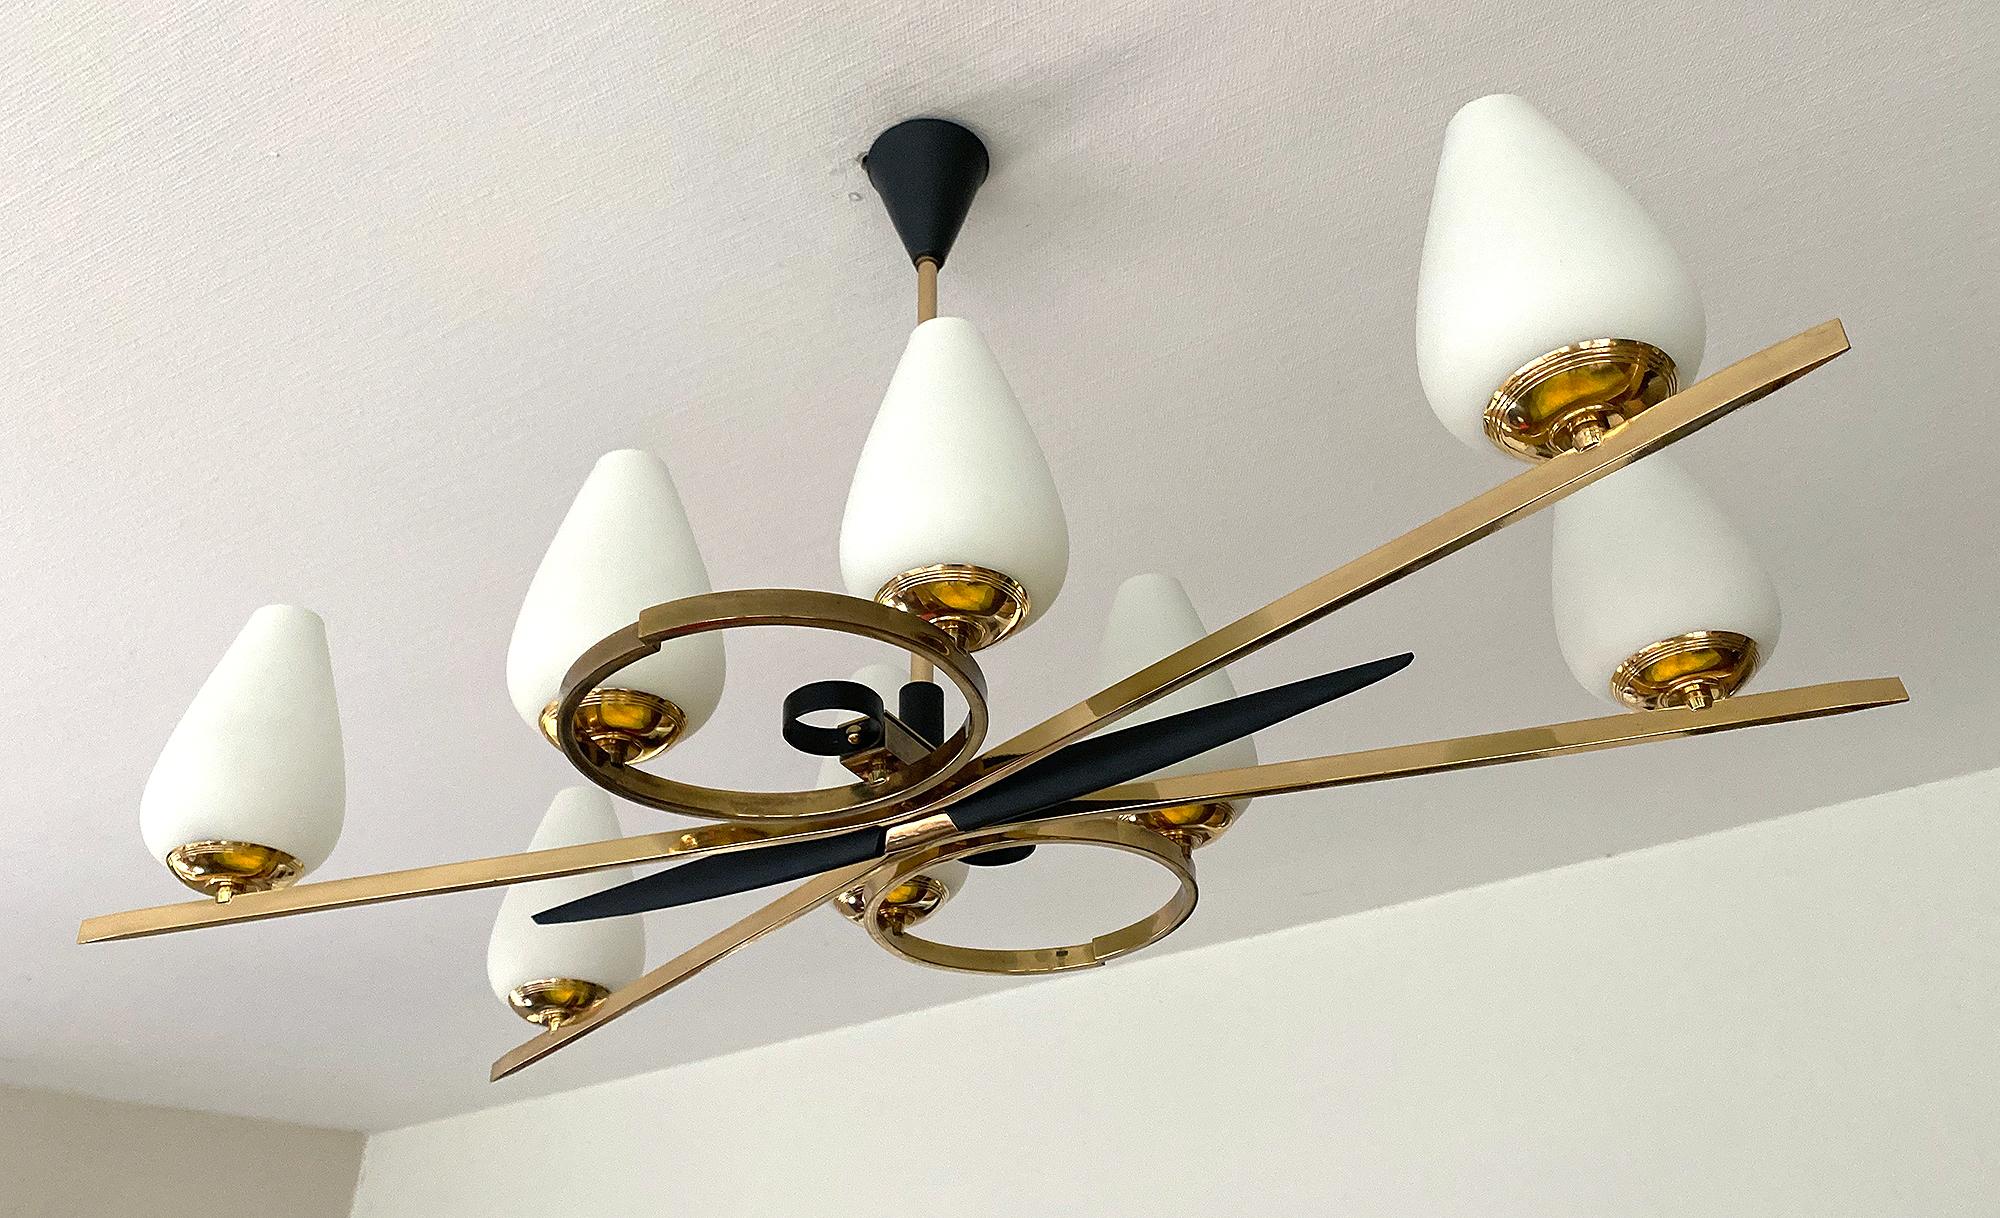 Exceptionnal large chandelier by Maison Arlus, this is the ONLY ONE available worldwide! 
it features an X-shaped brass structure flanked by 2 double circles with black enameled trim and centre piece, egg shaped opaline glass globe shades.  
Wiring: